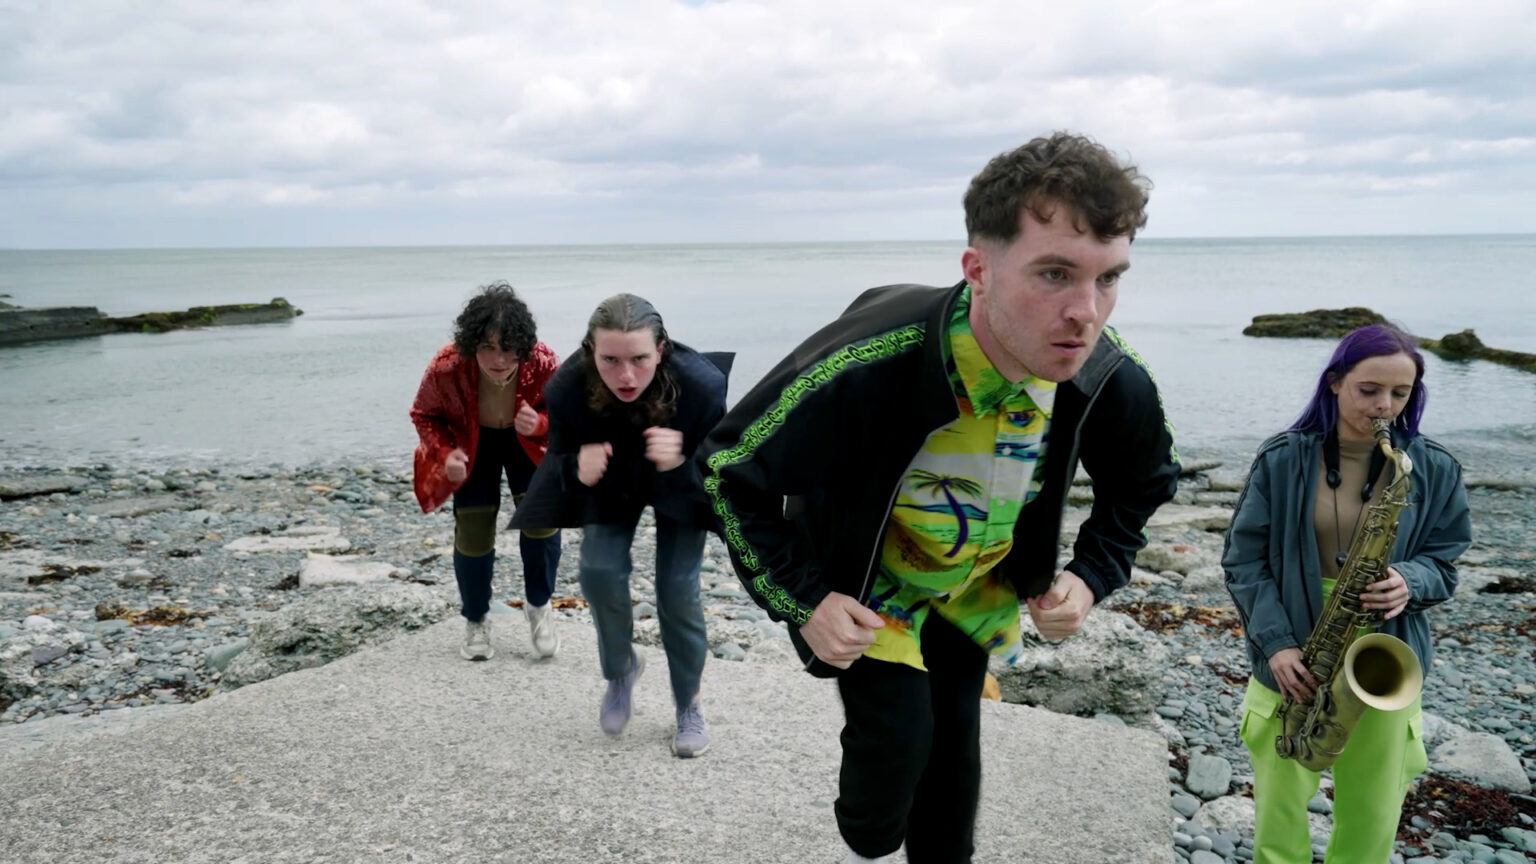 Still from video of a performance on a stony beach. Four young adults with light skin wear a mix of dark and bright clothing, including: a red sparkly jacket, lime green khaki pants, a yellow and a green Hawaii shirt under a casual black zipper with a green stripe down the sleeve that repeats the ASICS logo. The three people in the centre of the image are on a protruding rectangle of concrete. They have concentrated looks on their faces, and their bodies mirror each other while they hunch down to hold a "run on the spot" position. The person on the right hand side has purple hair and is playing the saxophone. Behind them the sea is grey and the sky is totally overcast.